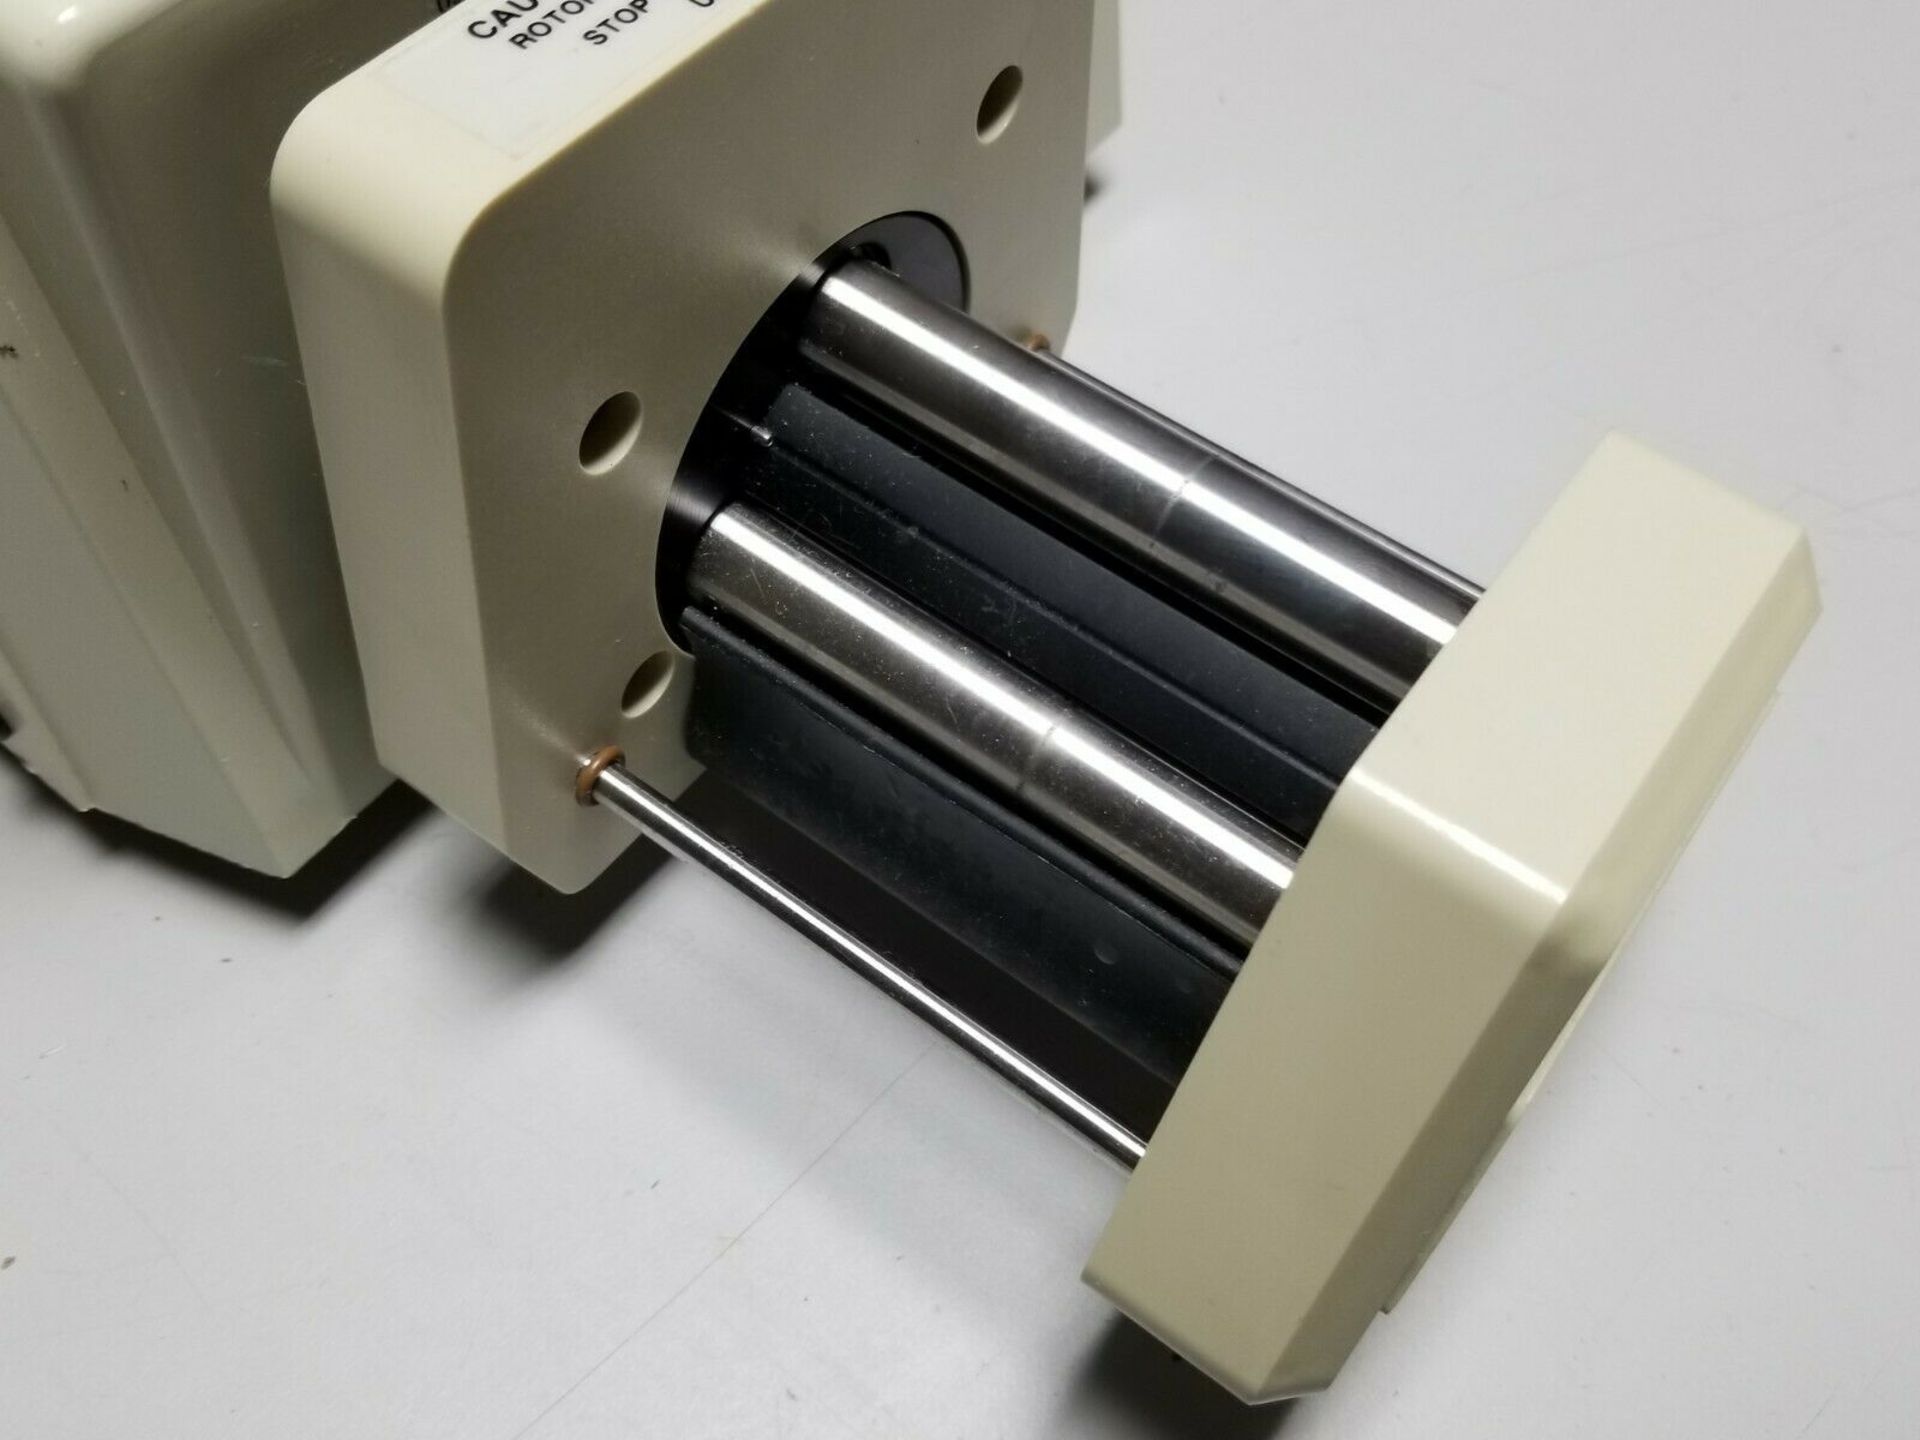 Cole Parmer Masterflex Digital Drive With Cartridge Pump - Image 11 of 11